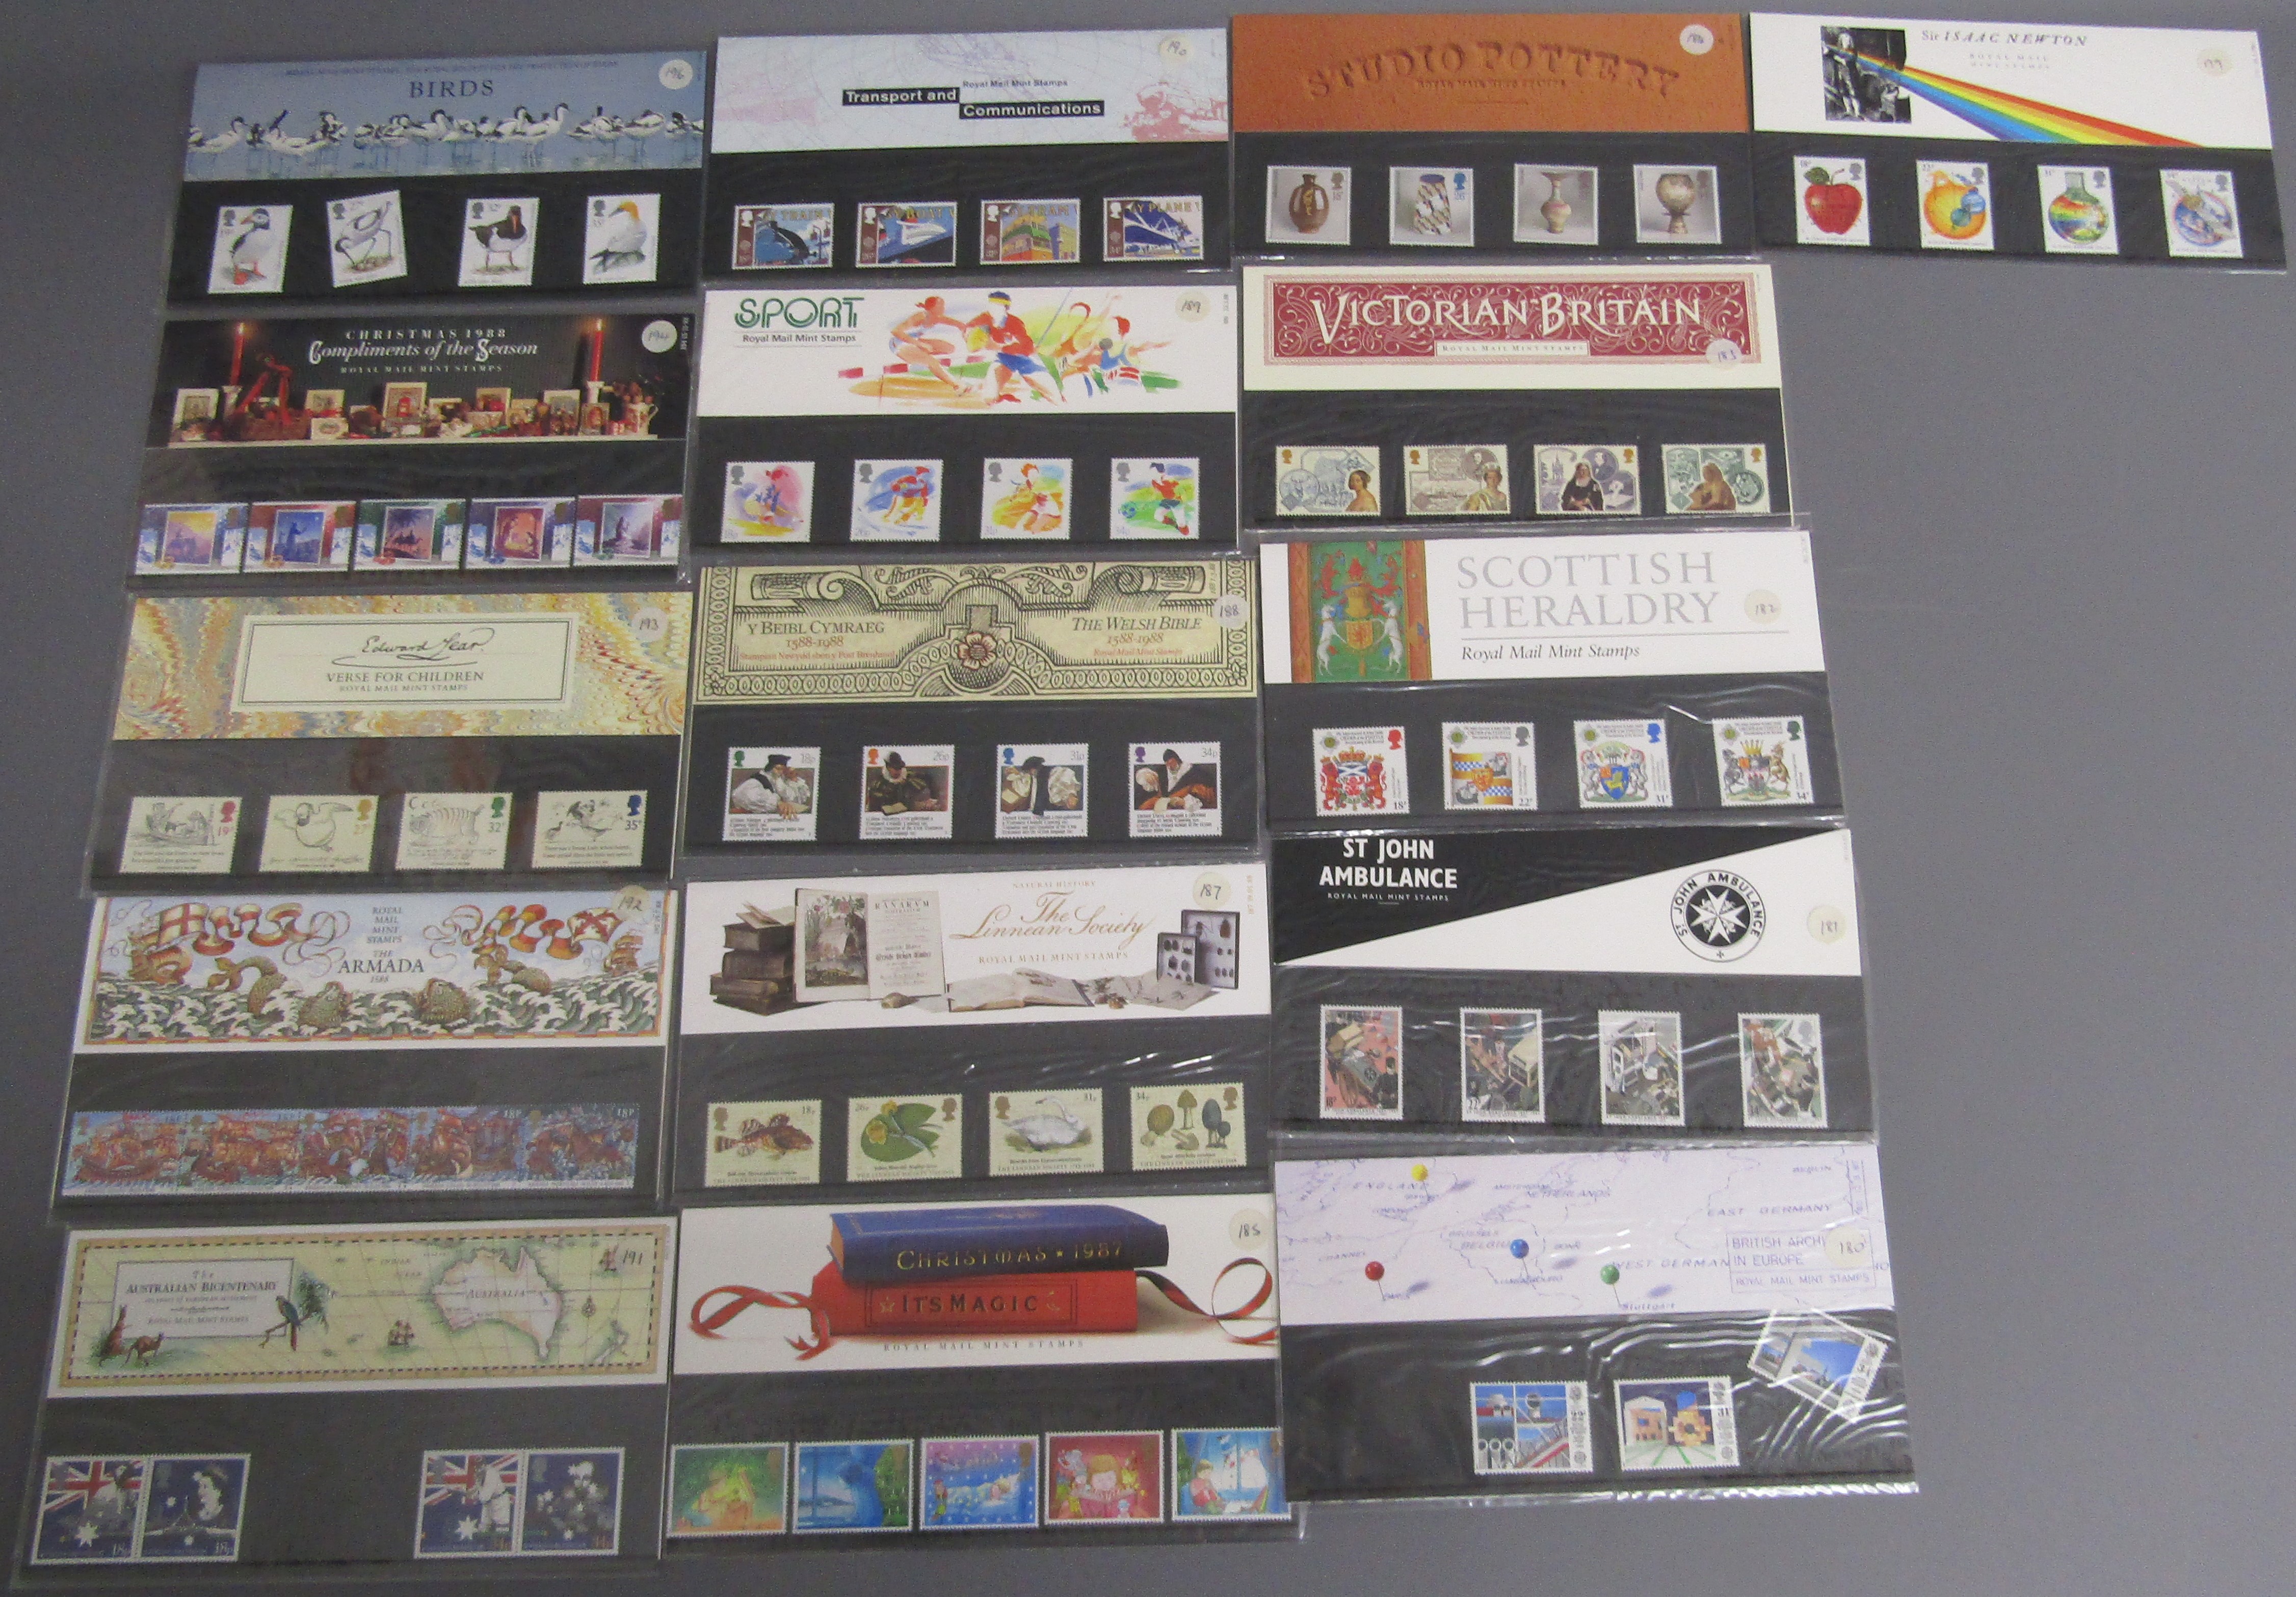 3 binders of Royal Mail Mint stamp sets consists of 2 x  Royal Mail Presentation Pack binders - Image 7 of 7